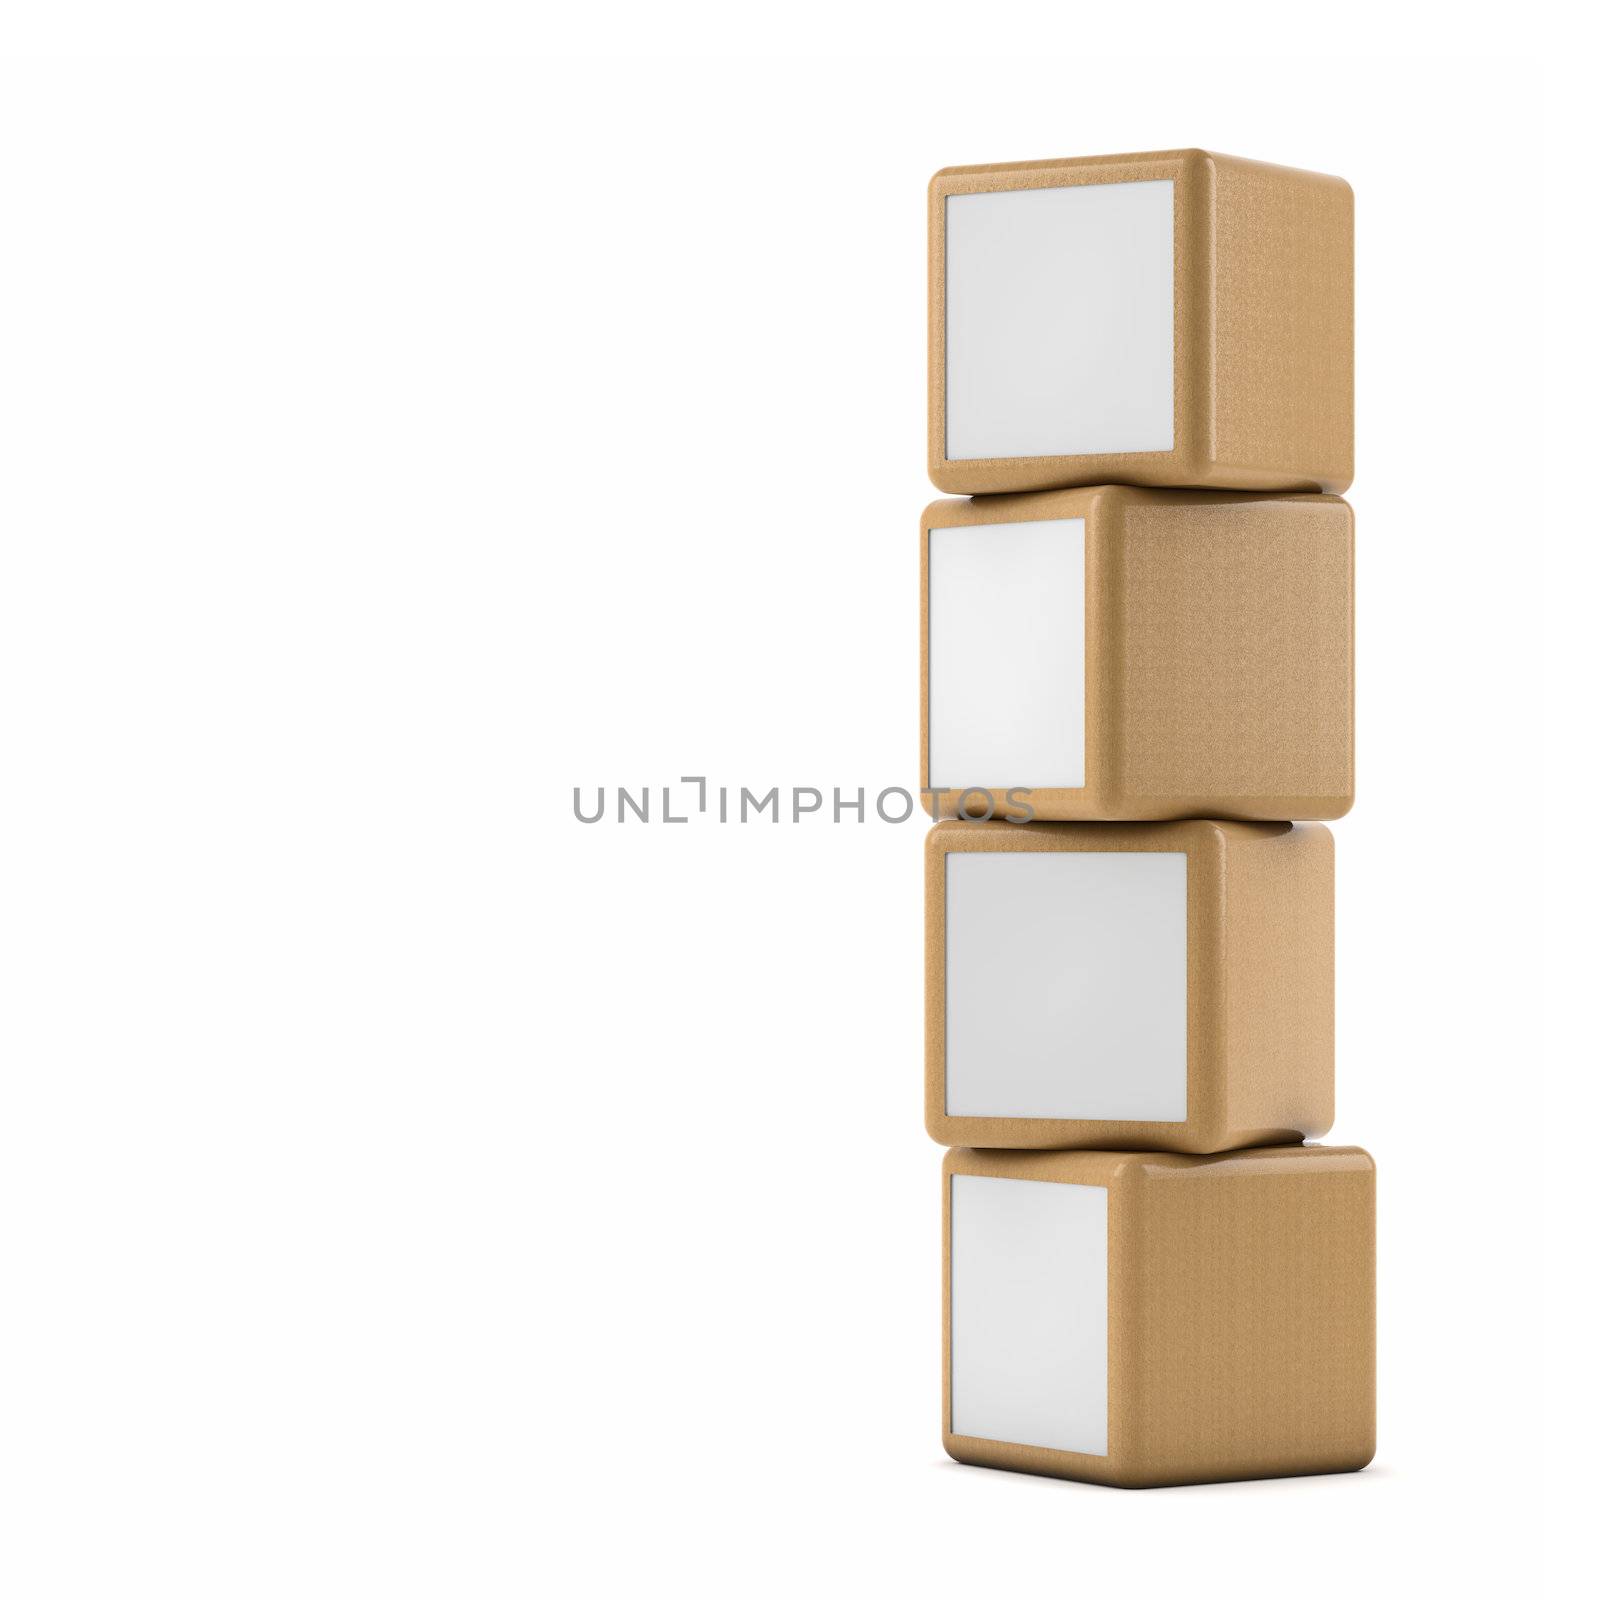 Advertising boxes pile on white background